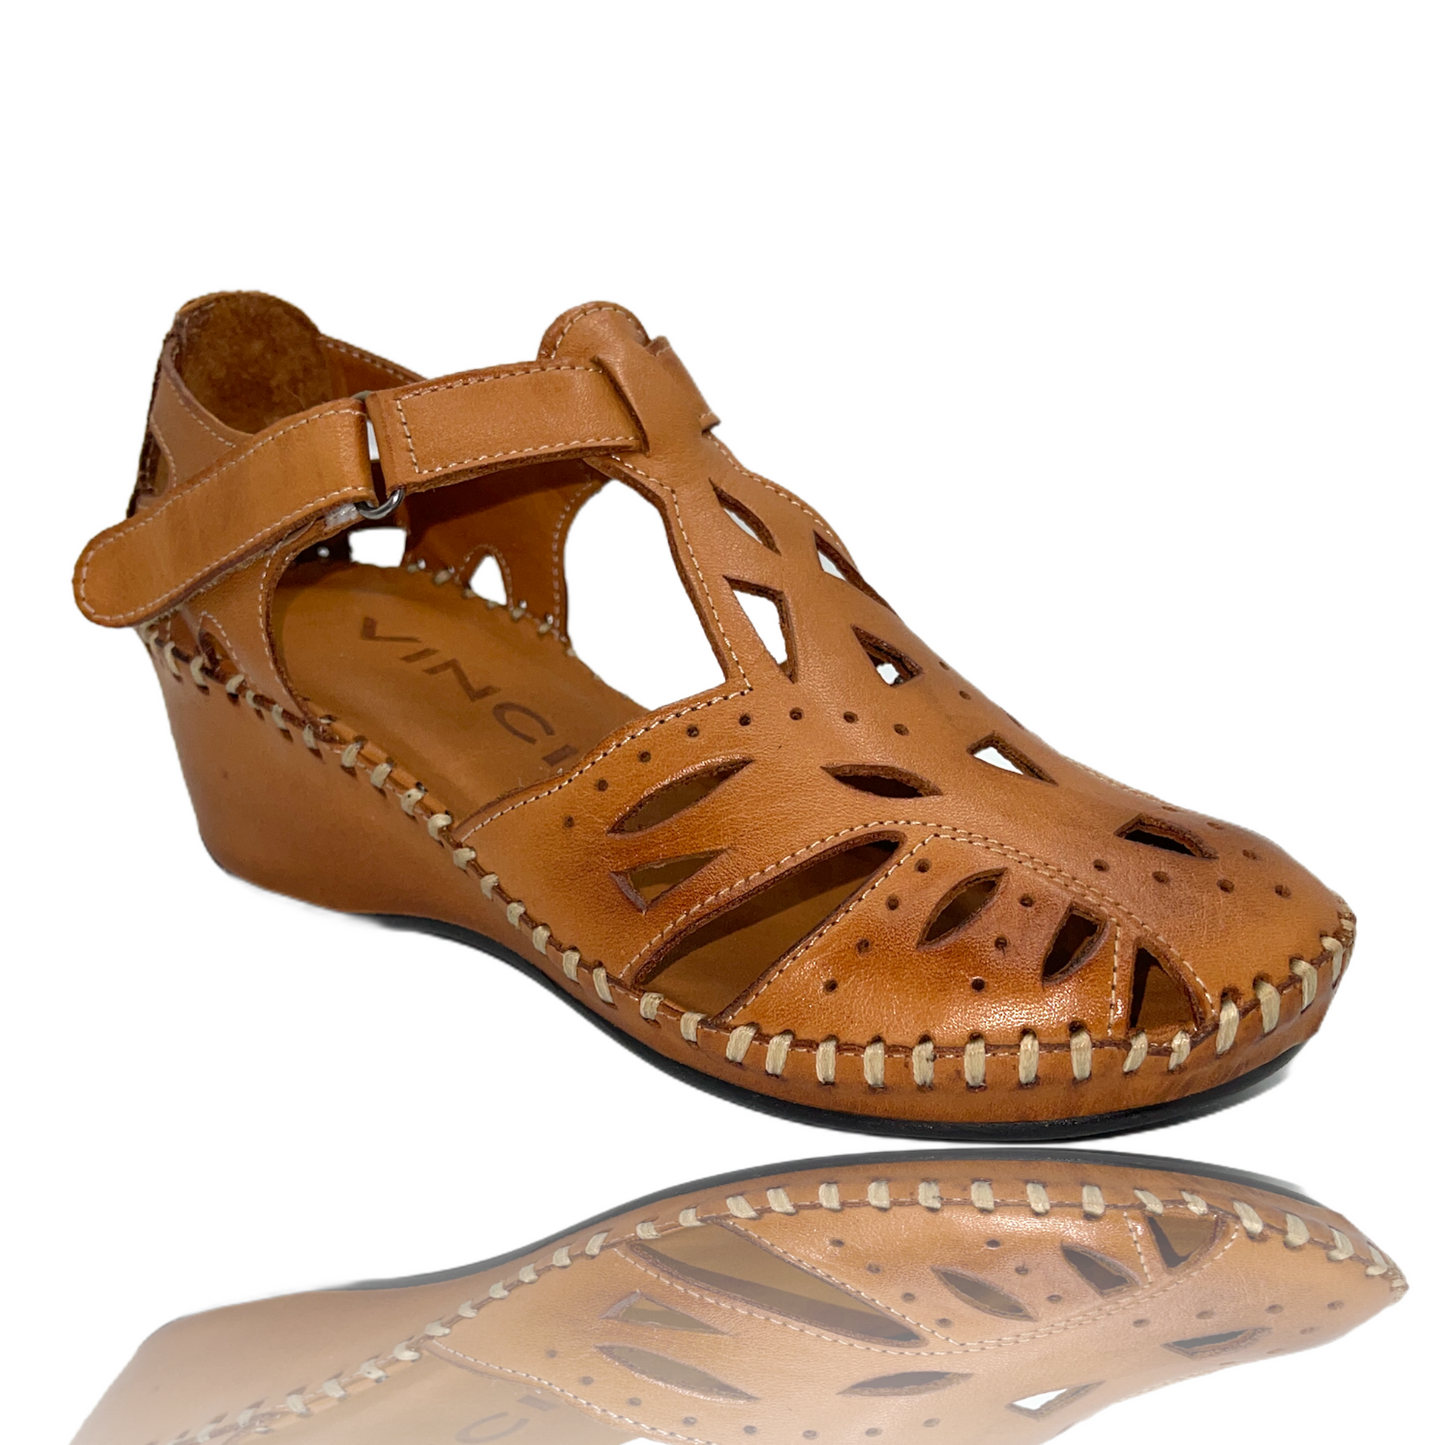 The Tonmawr Brown Leather Sandal Final Sale!